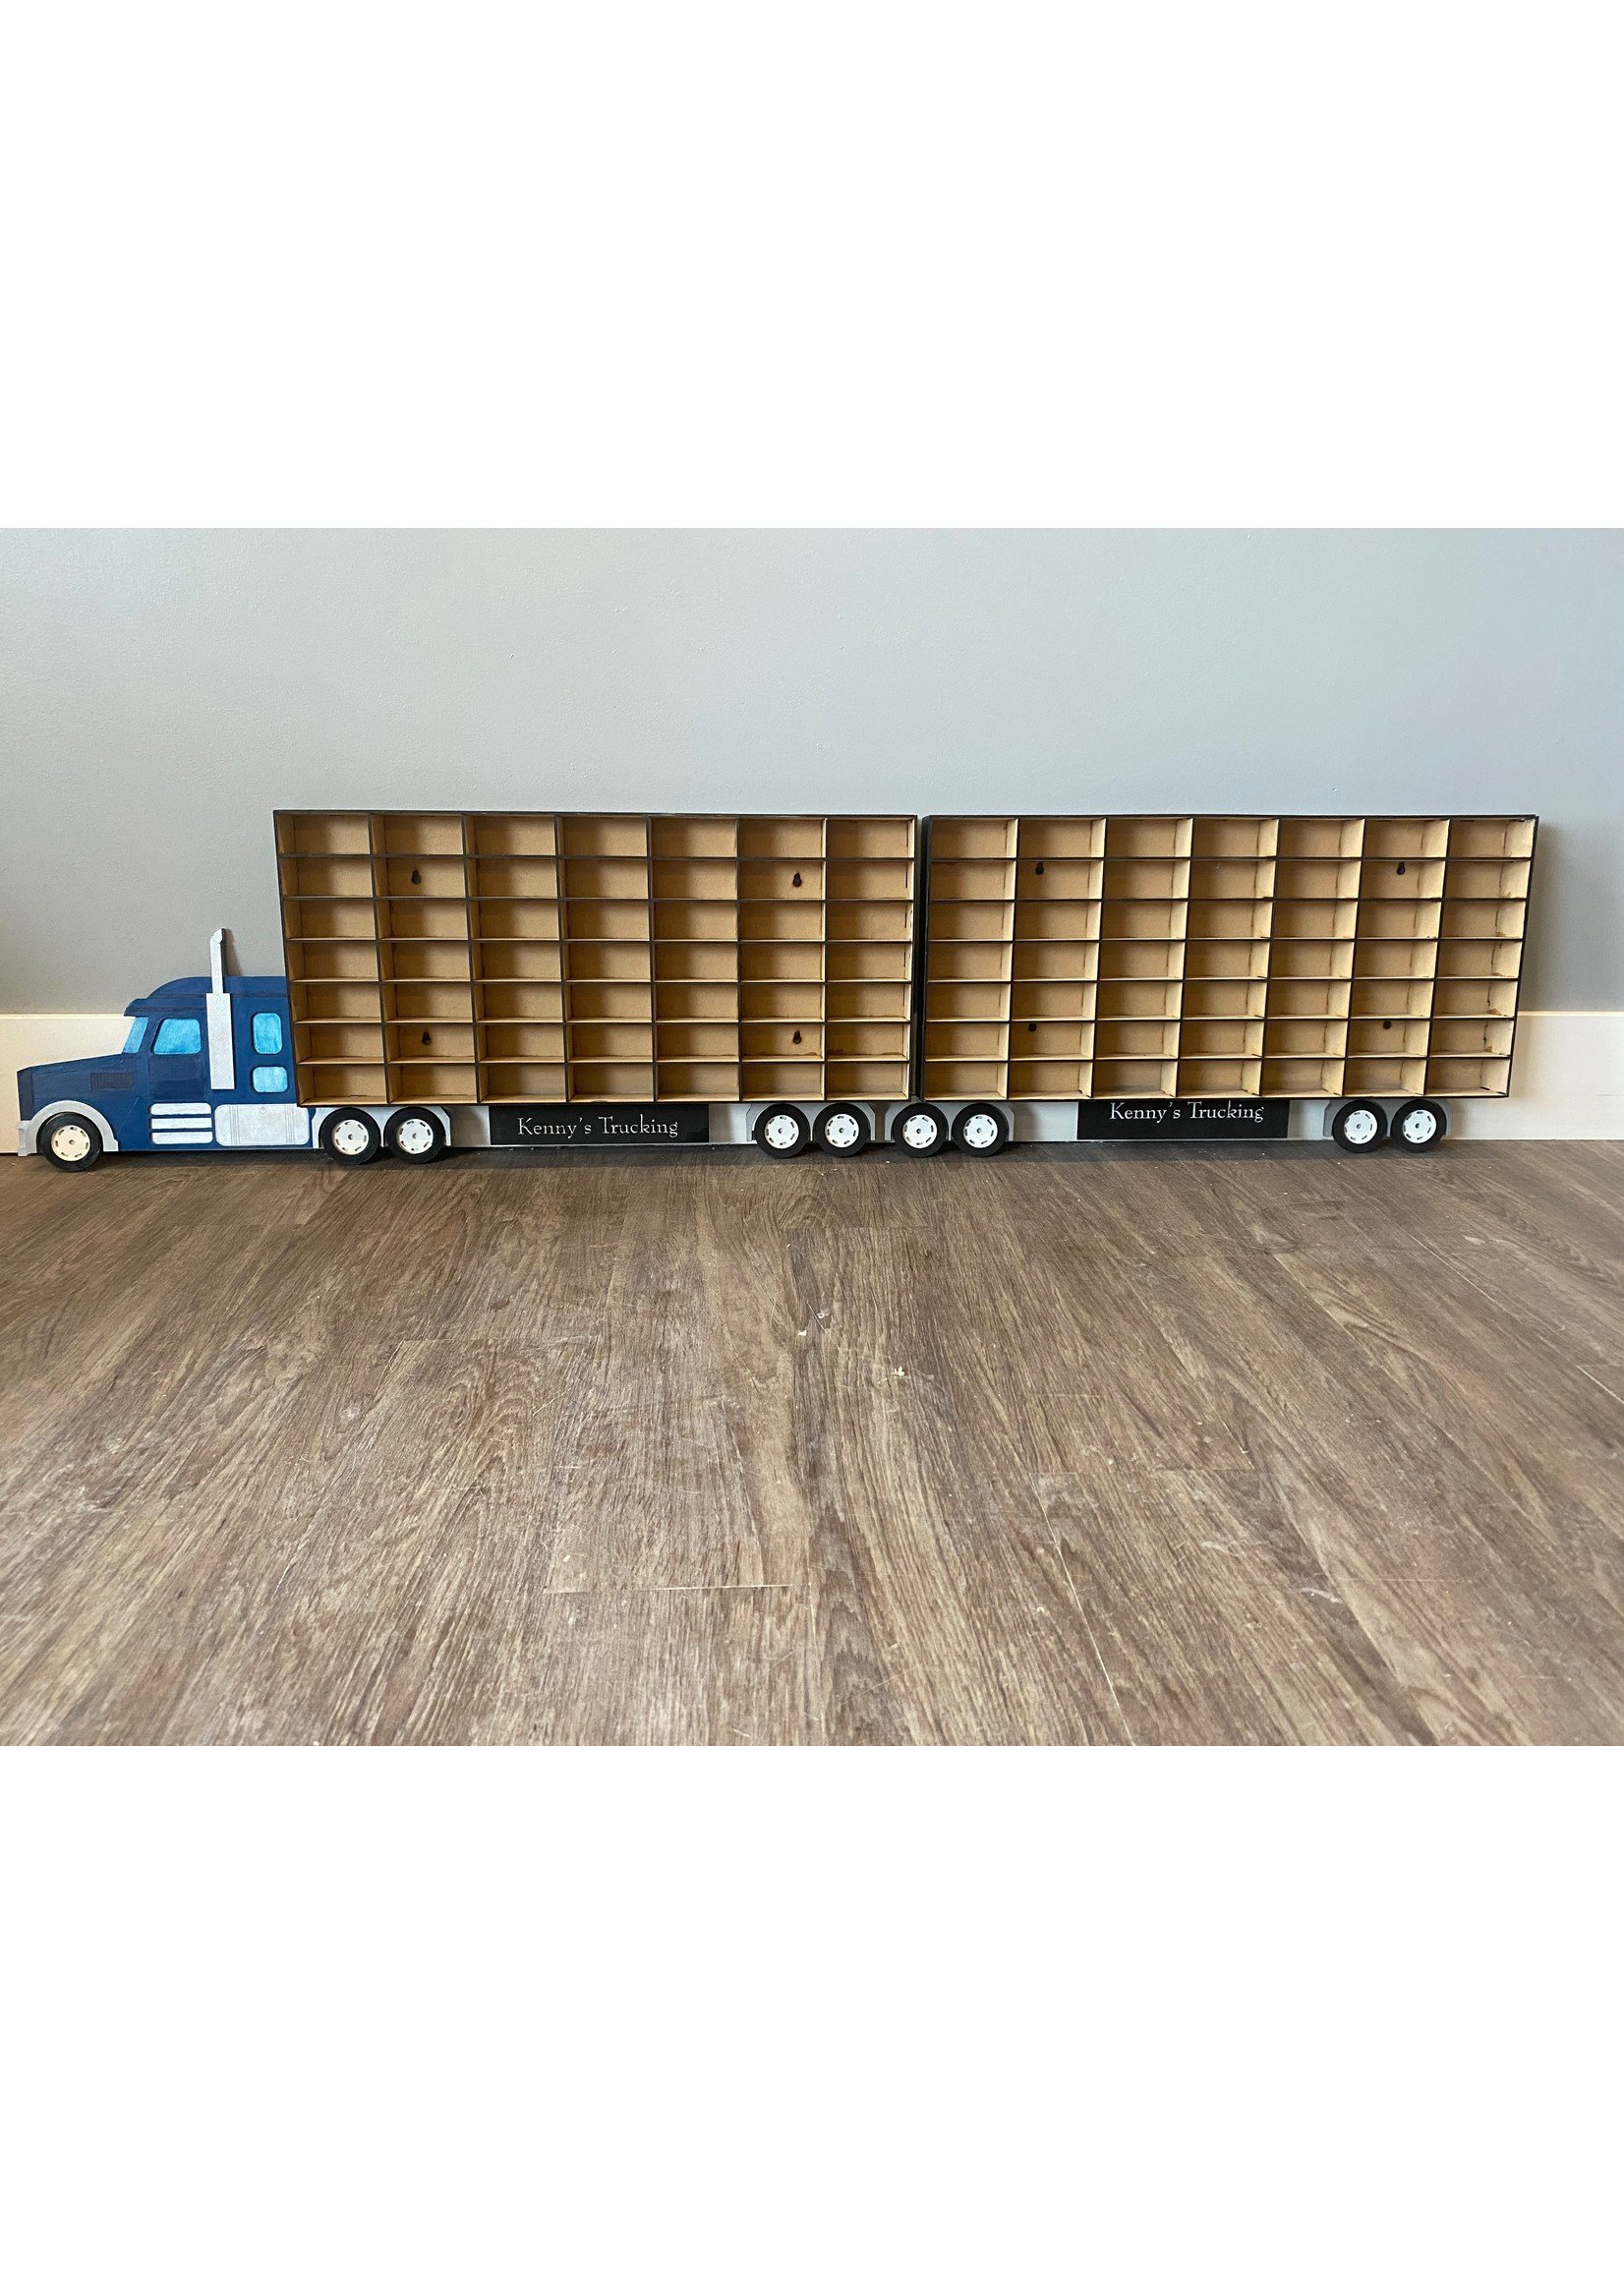 Laser cut Display for Hotwheels Matchbox toys. Truck and 1 Trailer